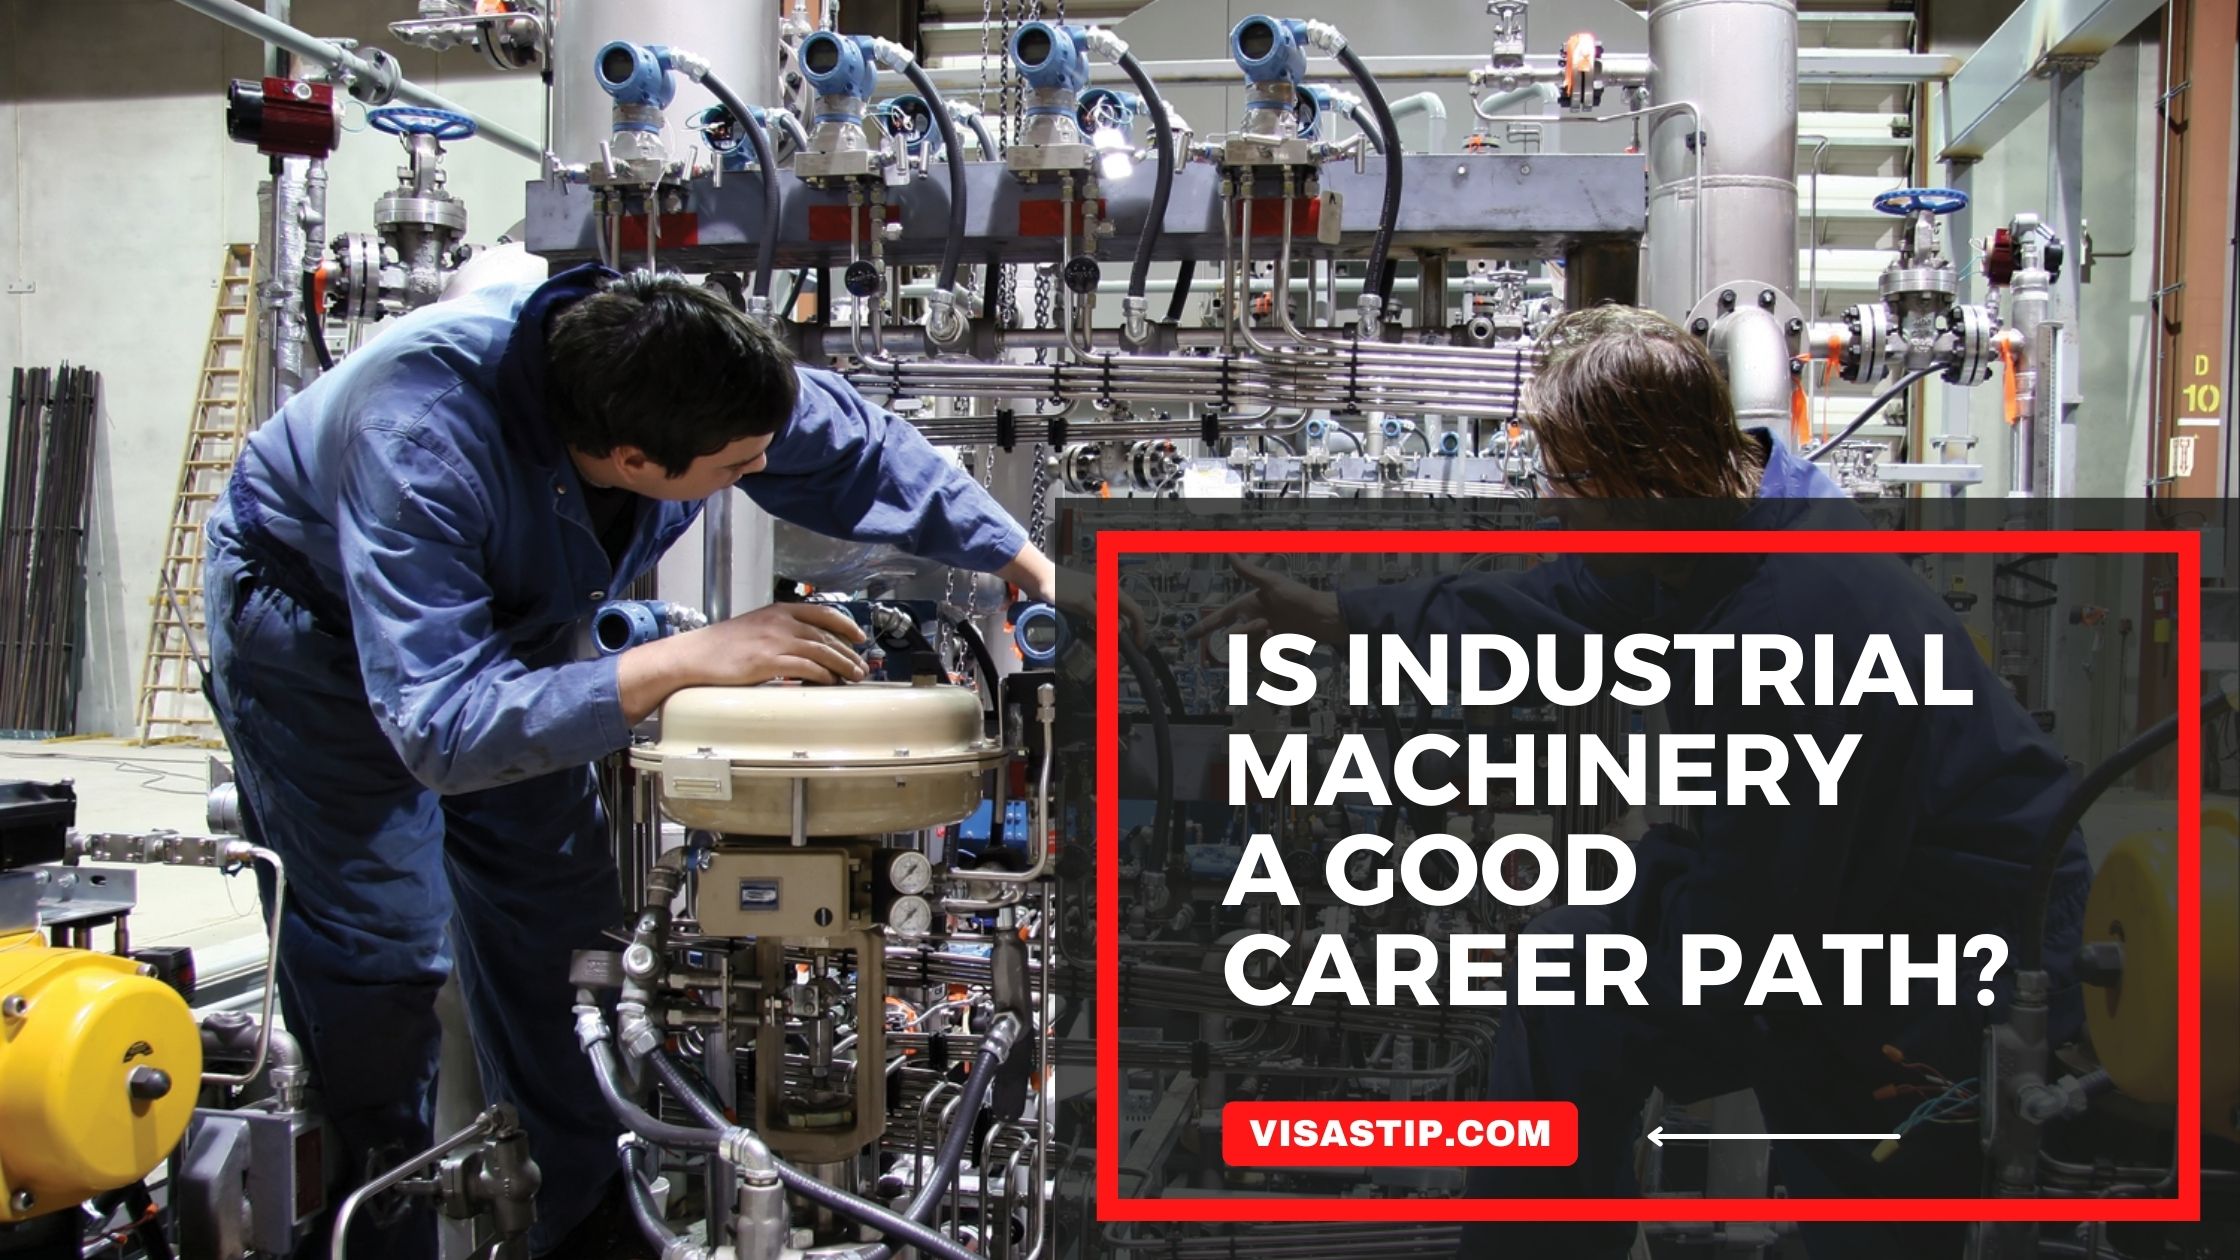 Industrial machinery a good career pathway